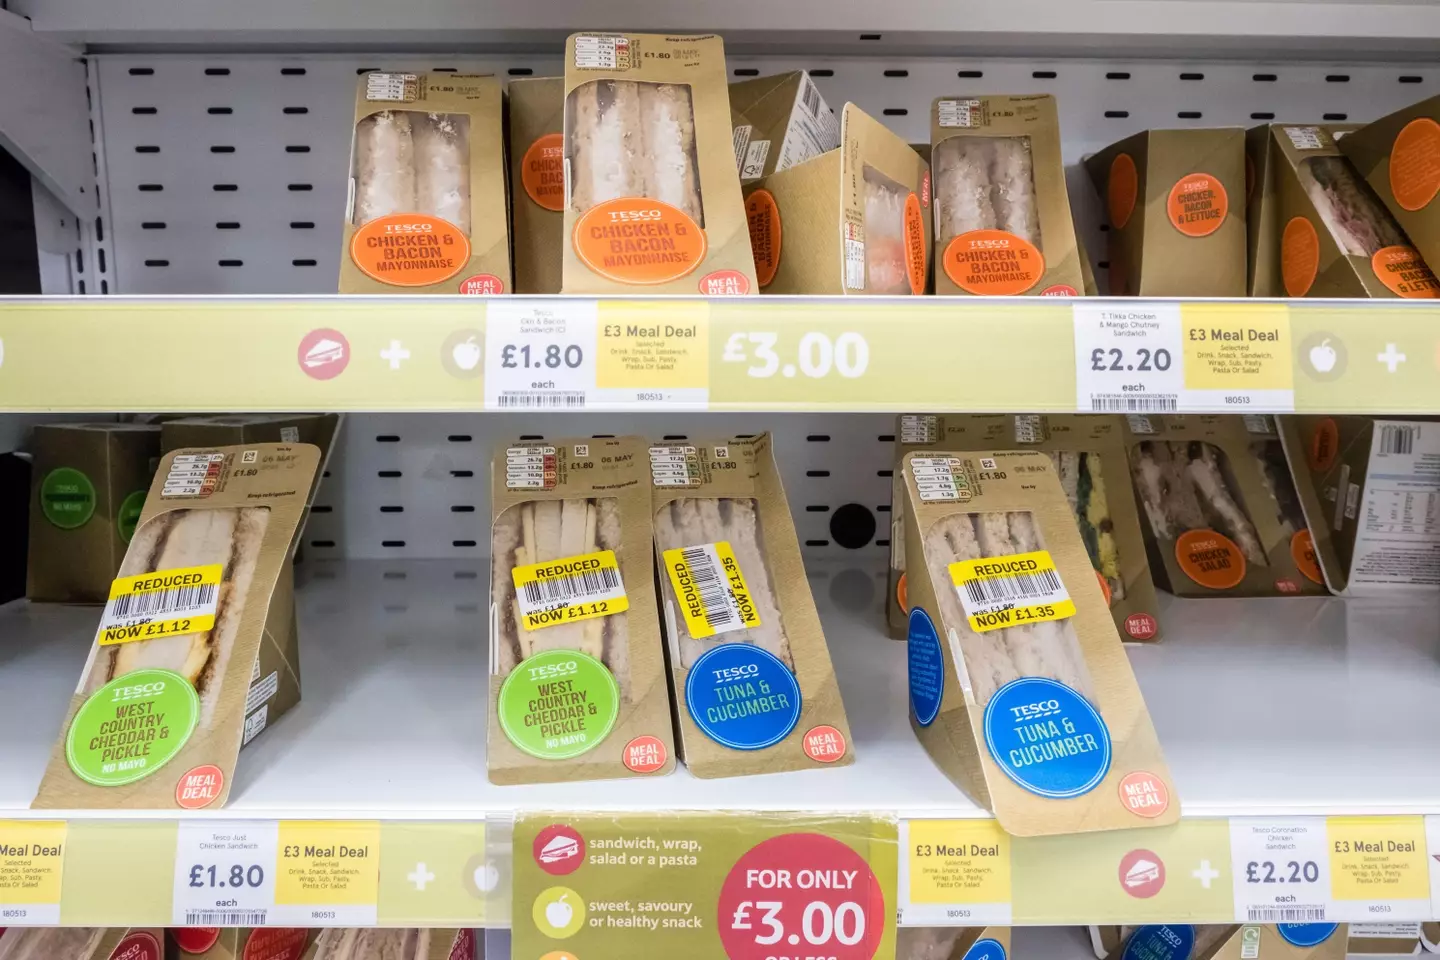 An obesity expert has said that supermarket meal deals should be ‘illegal’.